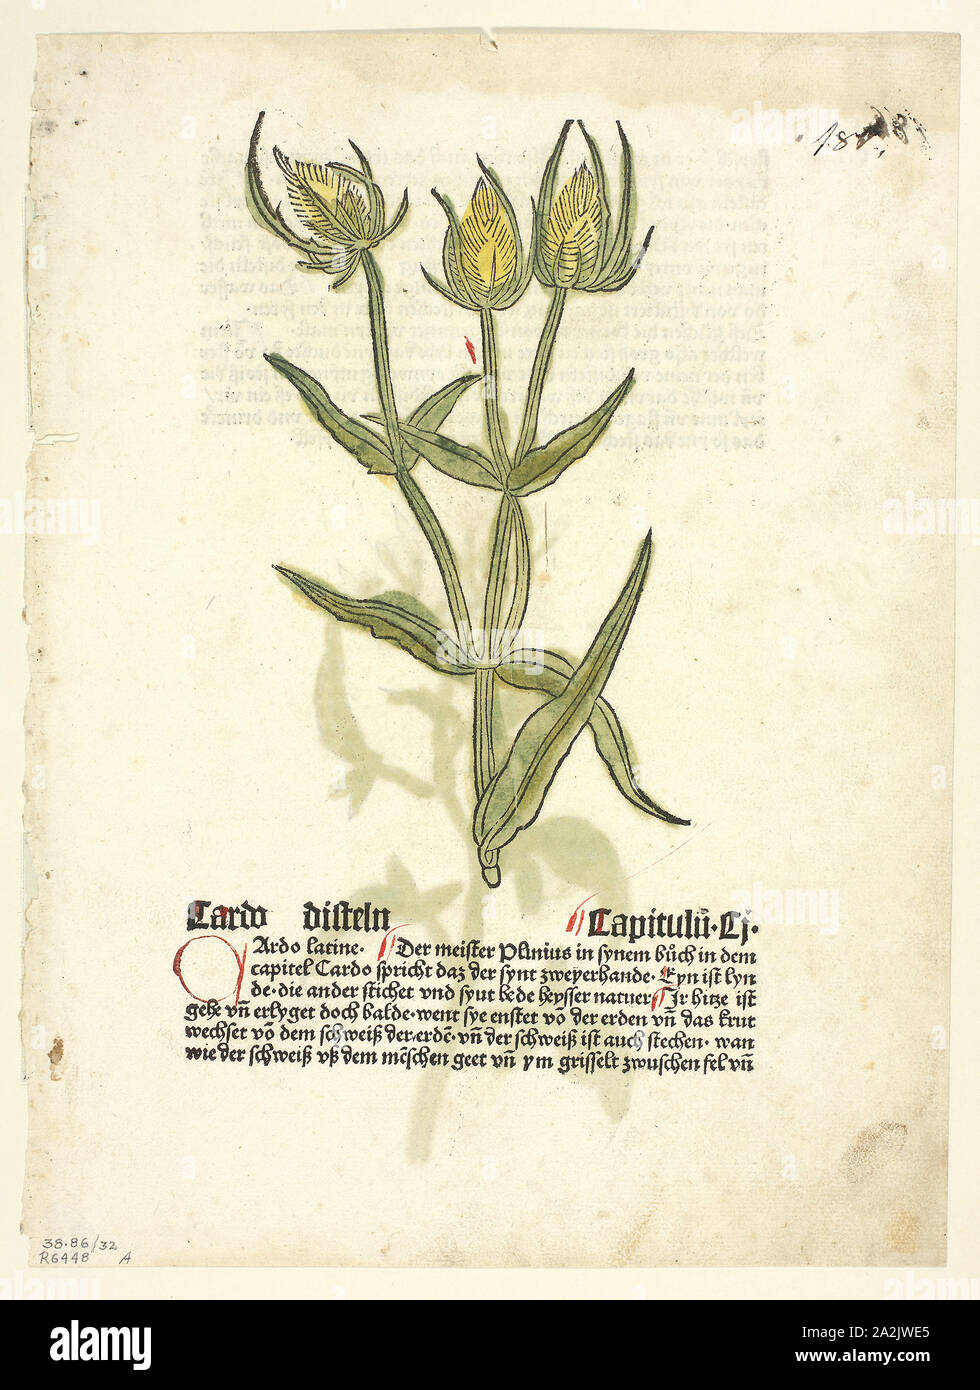 Thistle (recto) and Thistle buds (verso) from Gart Der Gesundheit (also called Hortus sanitatis, or Garden of Health), Plate 32 from Woodcuts from Books of the 15th Century, 1485, portfolio assembled 1929, Attributed to Erhard Reuwich (Dutch, c. 1455–c. 1490), printed and published by Peter Schöffer (German, c. 1425–c. 1503), original text by Johann Wonnecke von Cube (German, c. 1430–1503), portfolio text by Wilhelm Ludwig Schreiber (German, 1855–1932), Netherlands, Woodcut in black with hand-colored additions and letterpress in black with rubrication (recto and verso) on cream laid paper Stock Photo